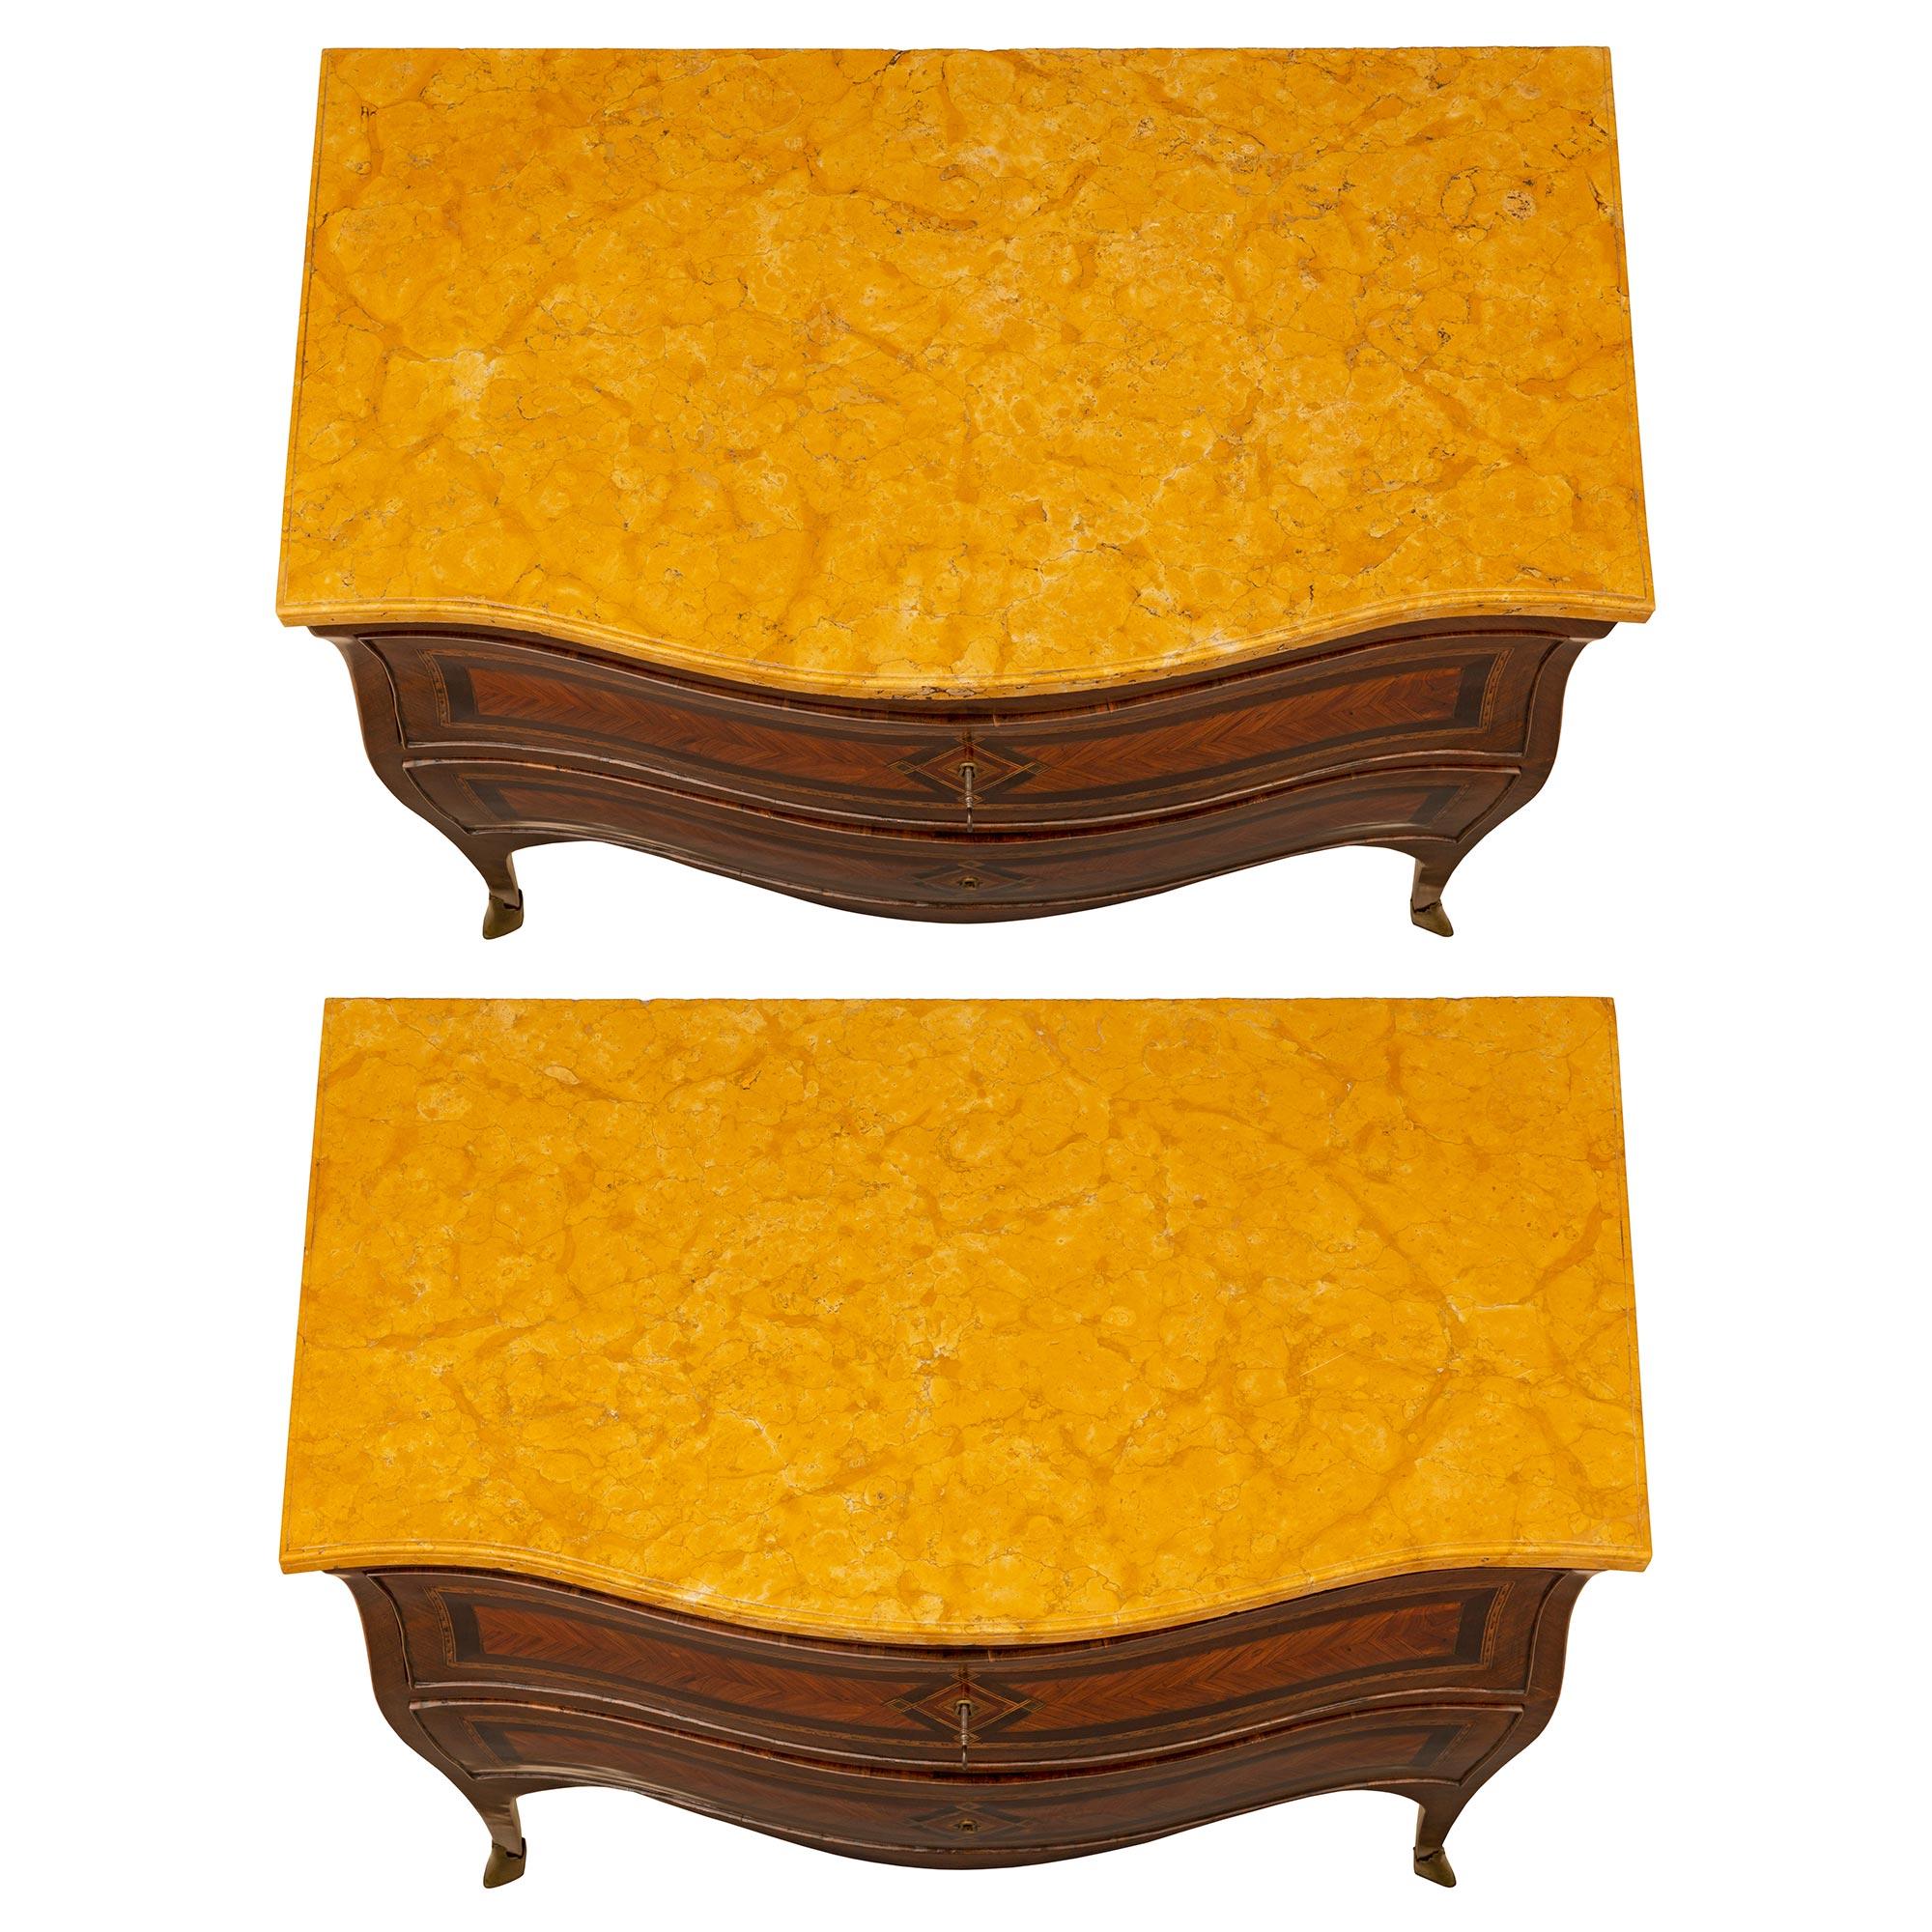 An exquisite and high quality pair of Italian 18th Louis XV period tulipwood and kingwood bombée commodes. Each chest is raised on four cabriole legs with brass wrap around sabots, and elegant tulipwood fillet. Above the arbalest shaped frieze are